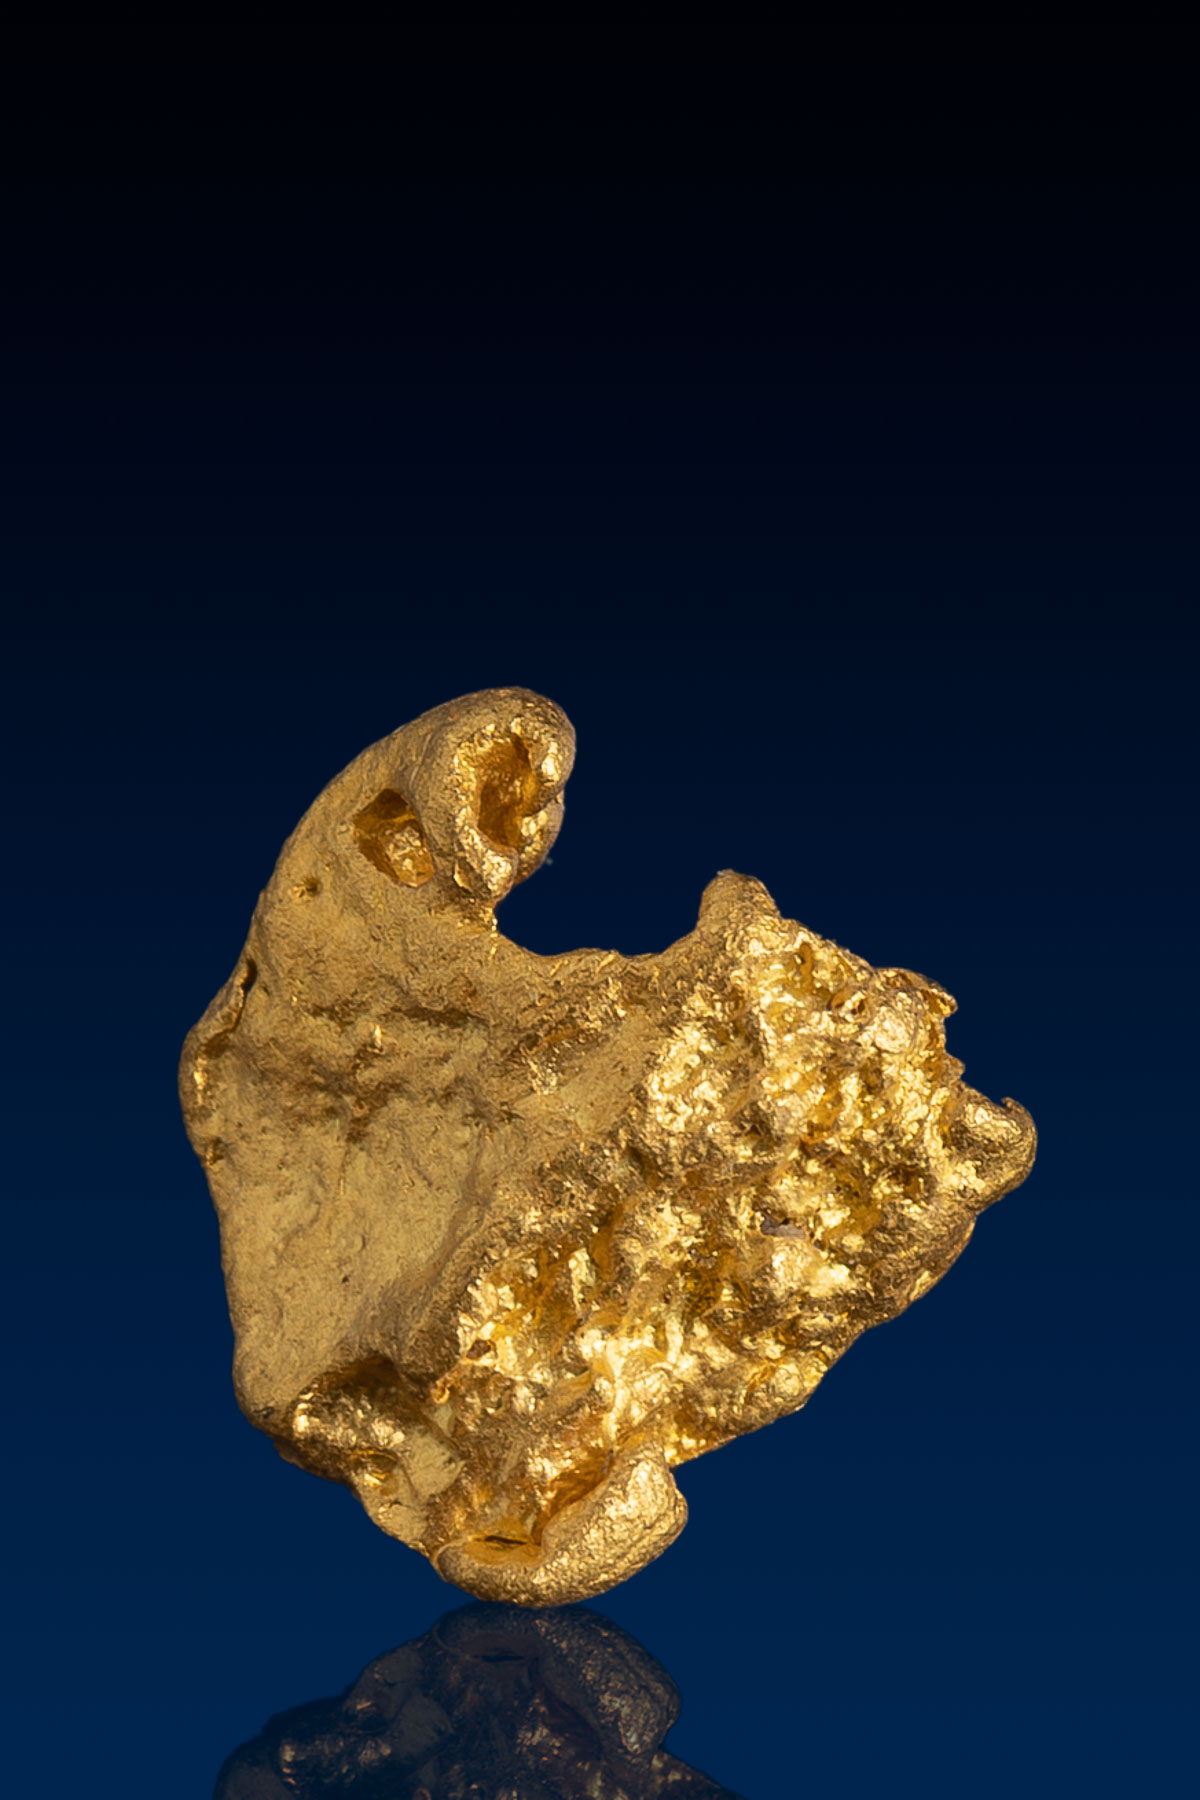 Natural Australian Gold Nugget with a Gap - 1.34 grams